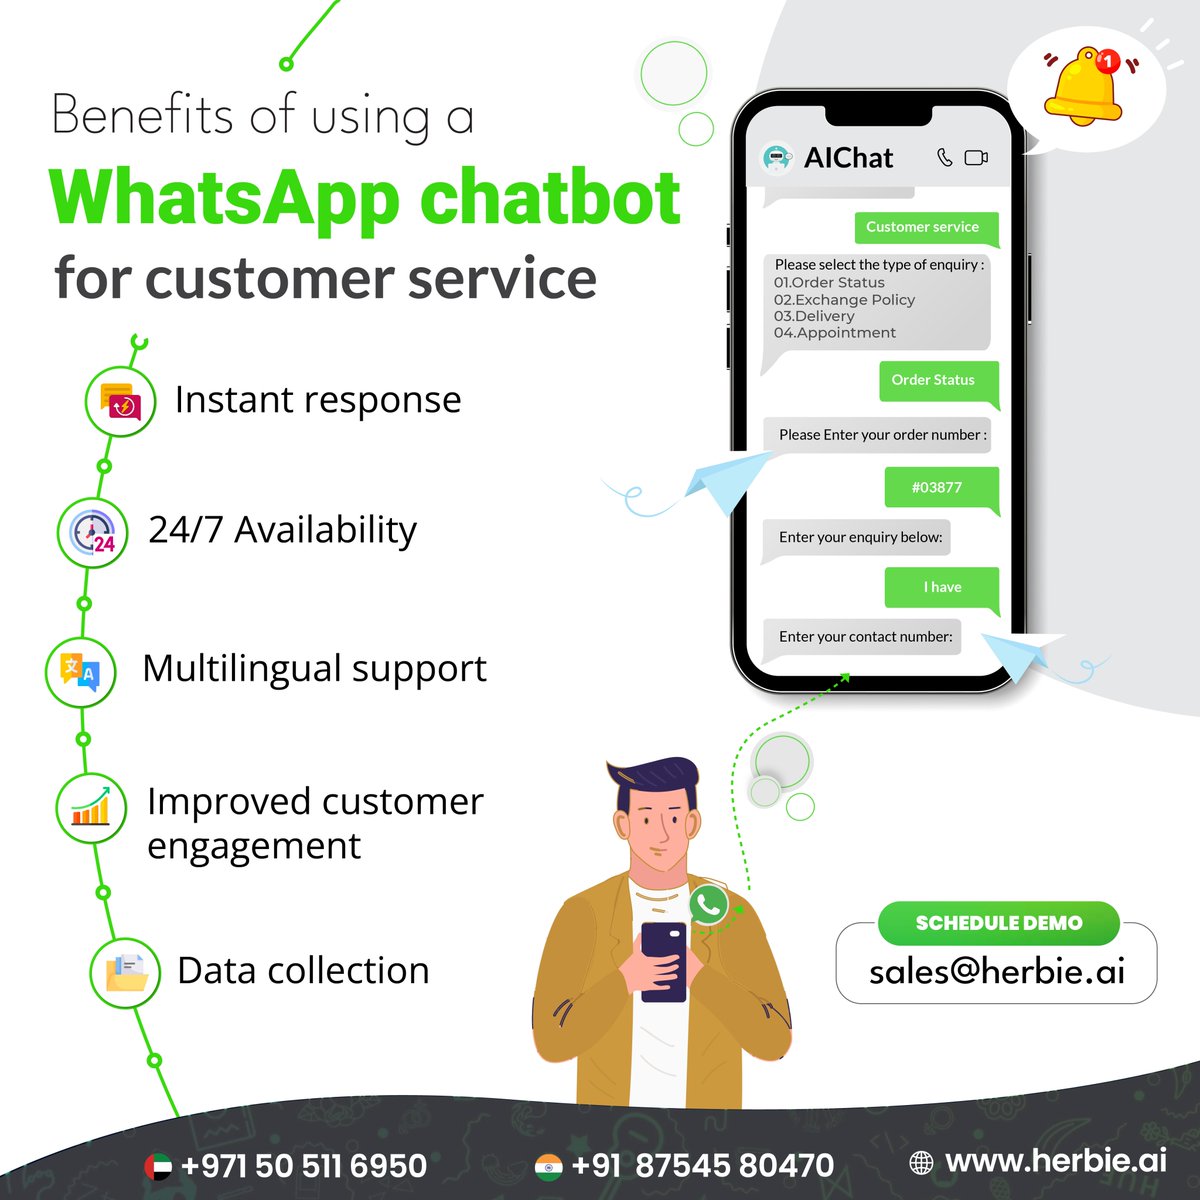 Get instant assistance anytime, anywhere with our WhatsApp chatbot. Say goodbye to long wait times and hello to hassle-free customer service!

herbie.ai

#chatbot #whatsapp #virtualassistant #whatsappchatbot #AI #CustomerService  #customerengagement #technology